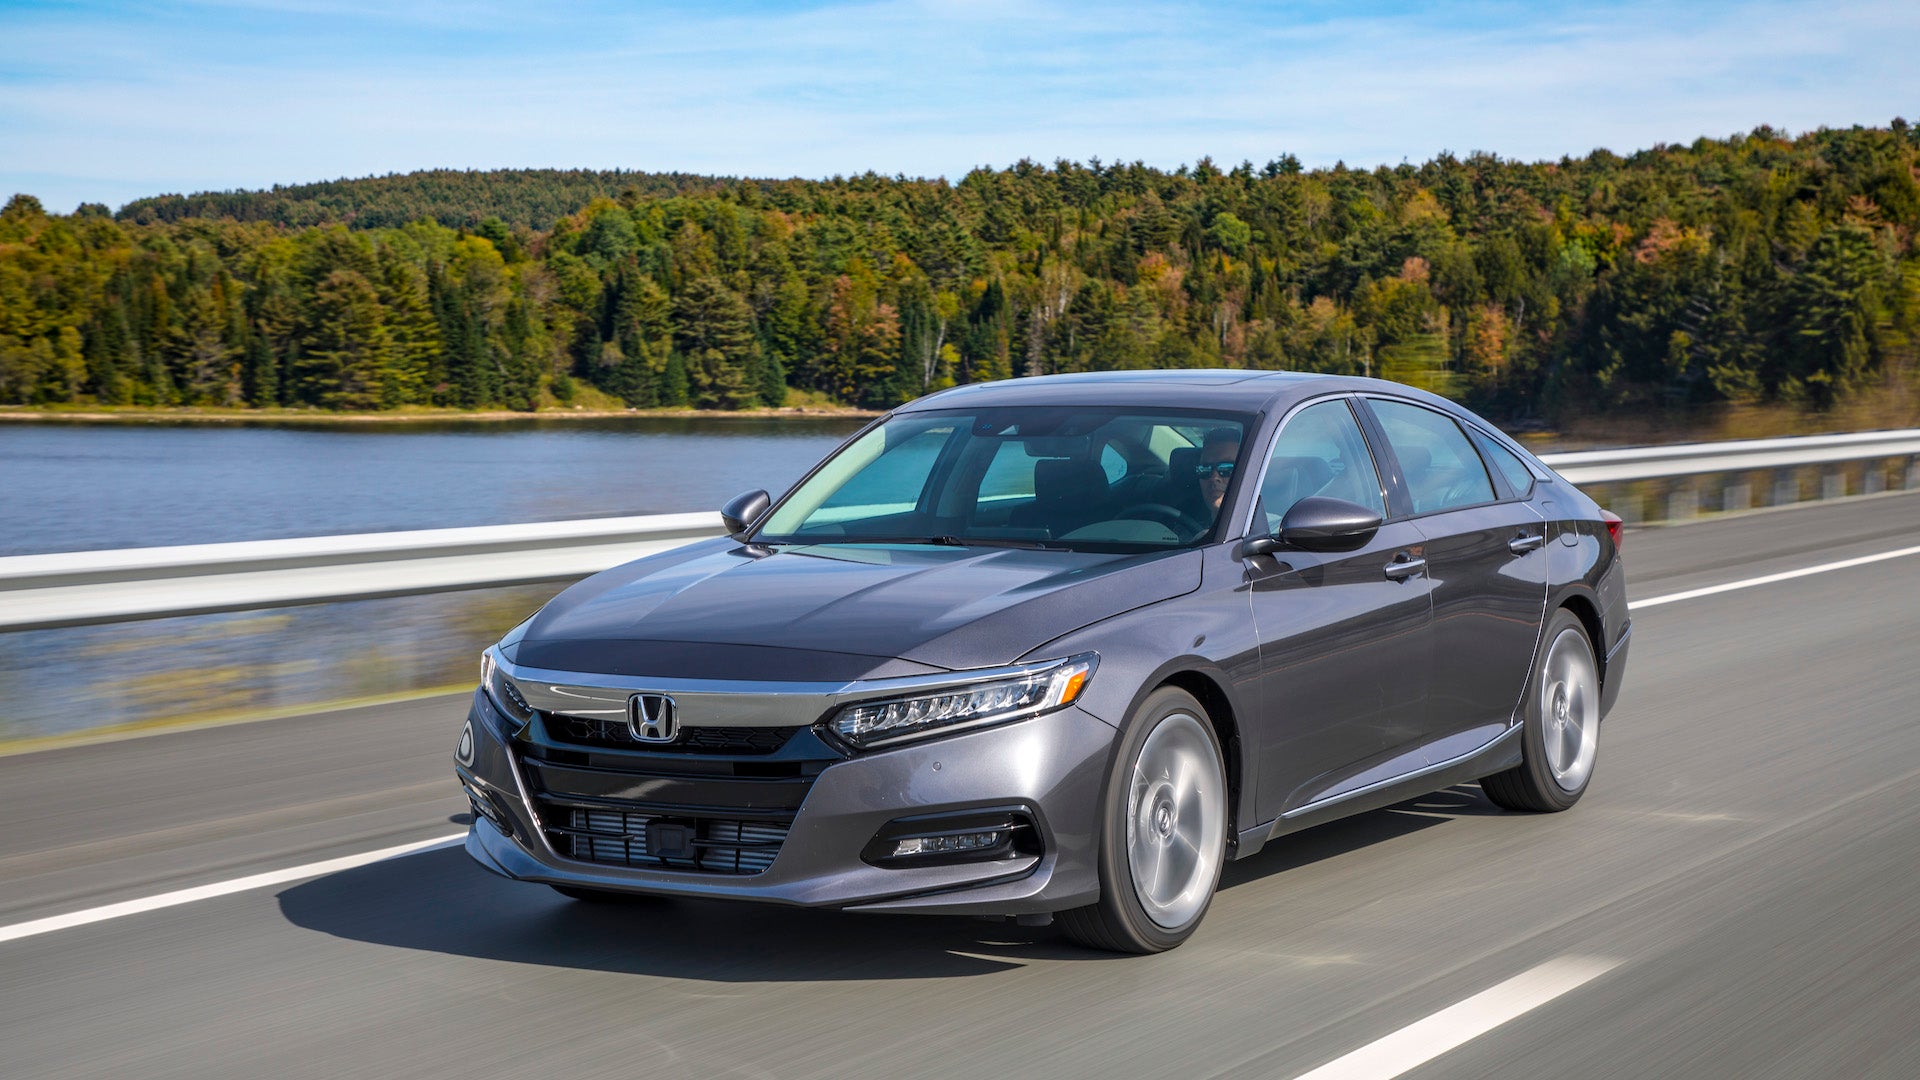 Honda Refuses to Track Stolen Accord Because Owner Didn't Pay ...